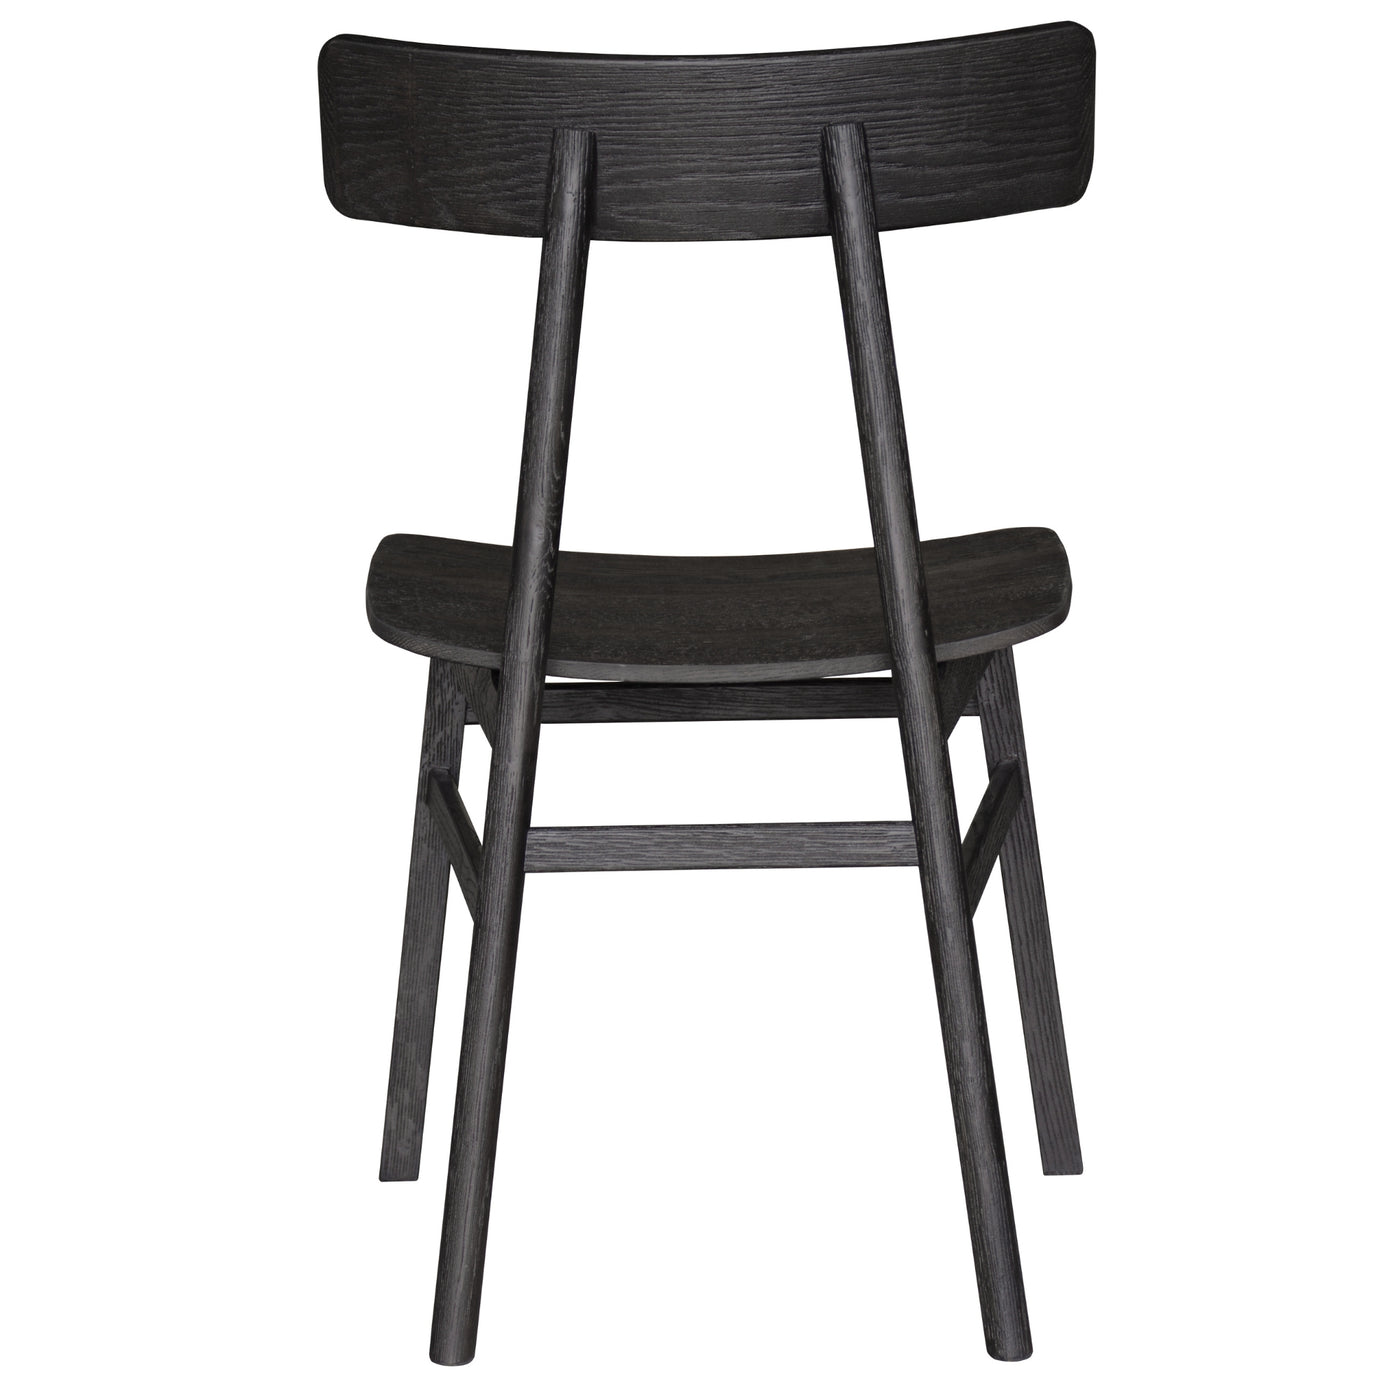 Claire Dining Chair Set of 2 Solid Oak Wood Timber Seat Furniture - Black